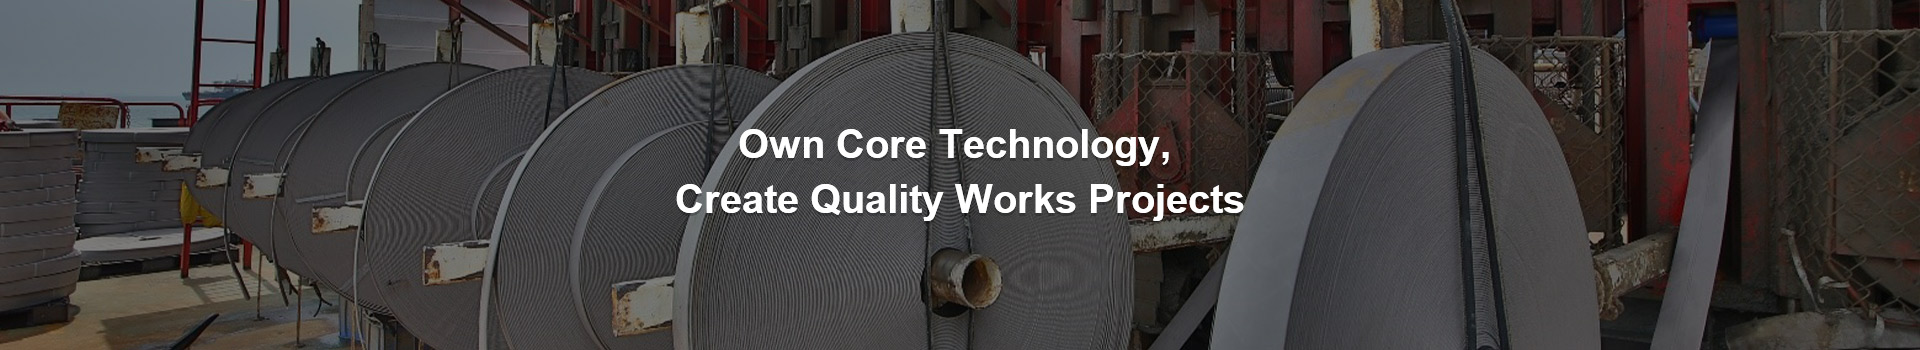 Own Core Technology, Create Quality Works Projects